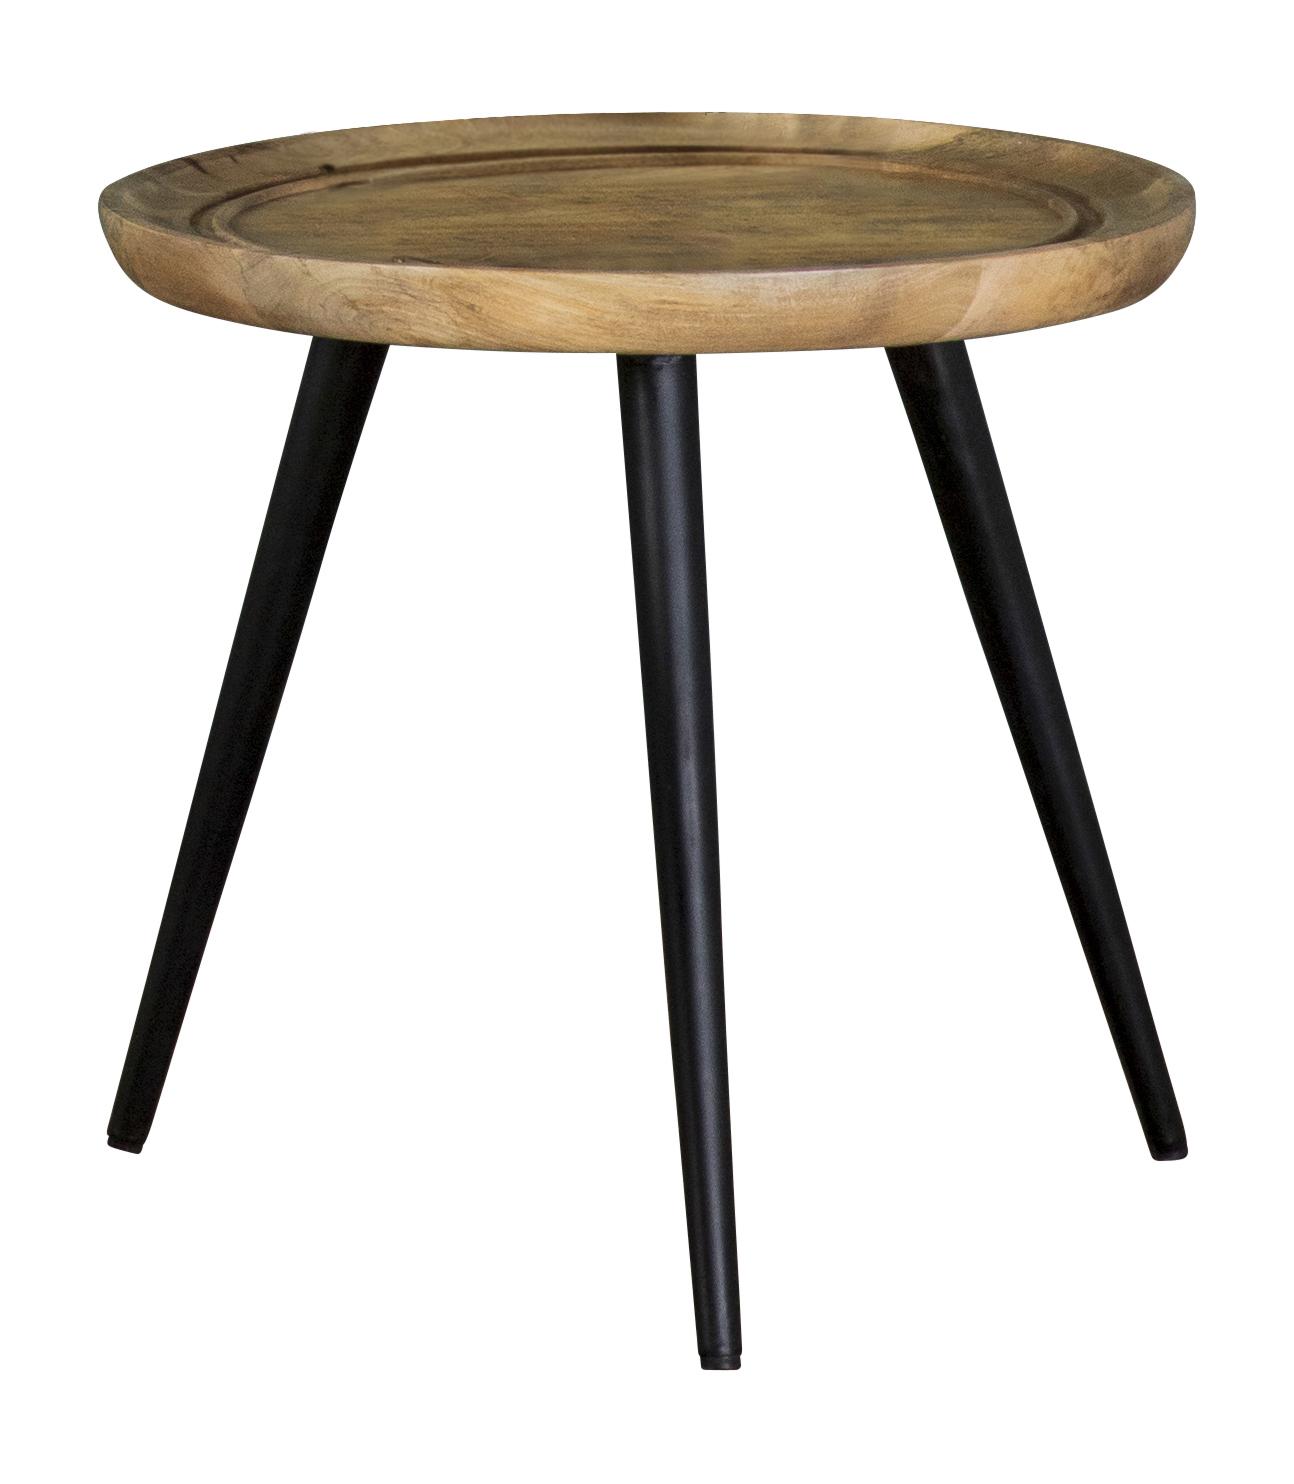 Contemporary End Table 736107 736107 in Natural 